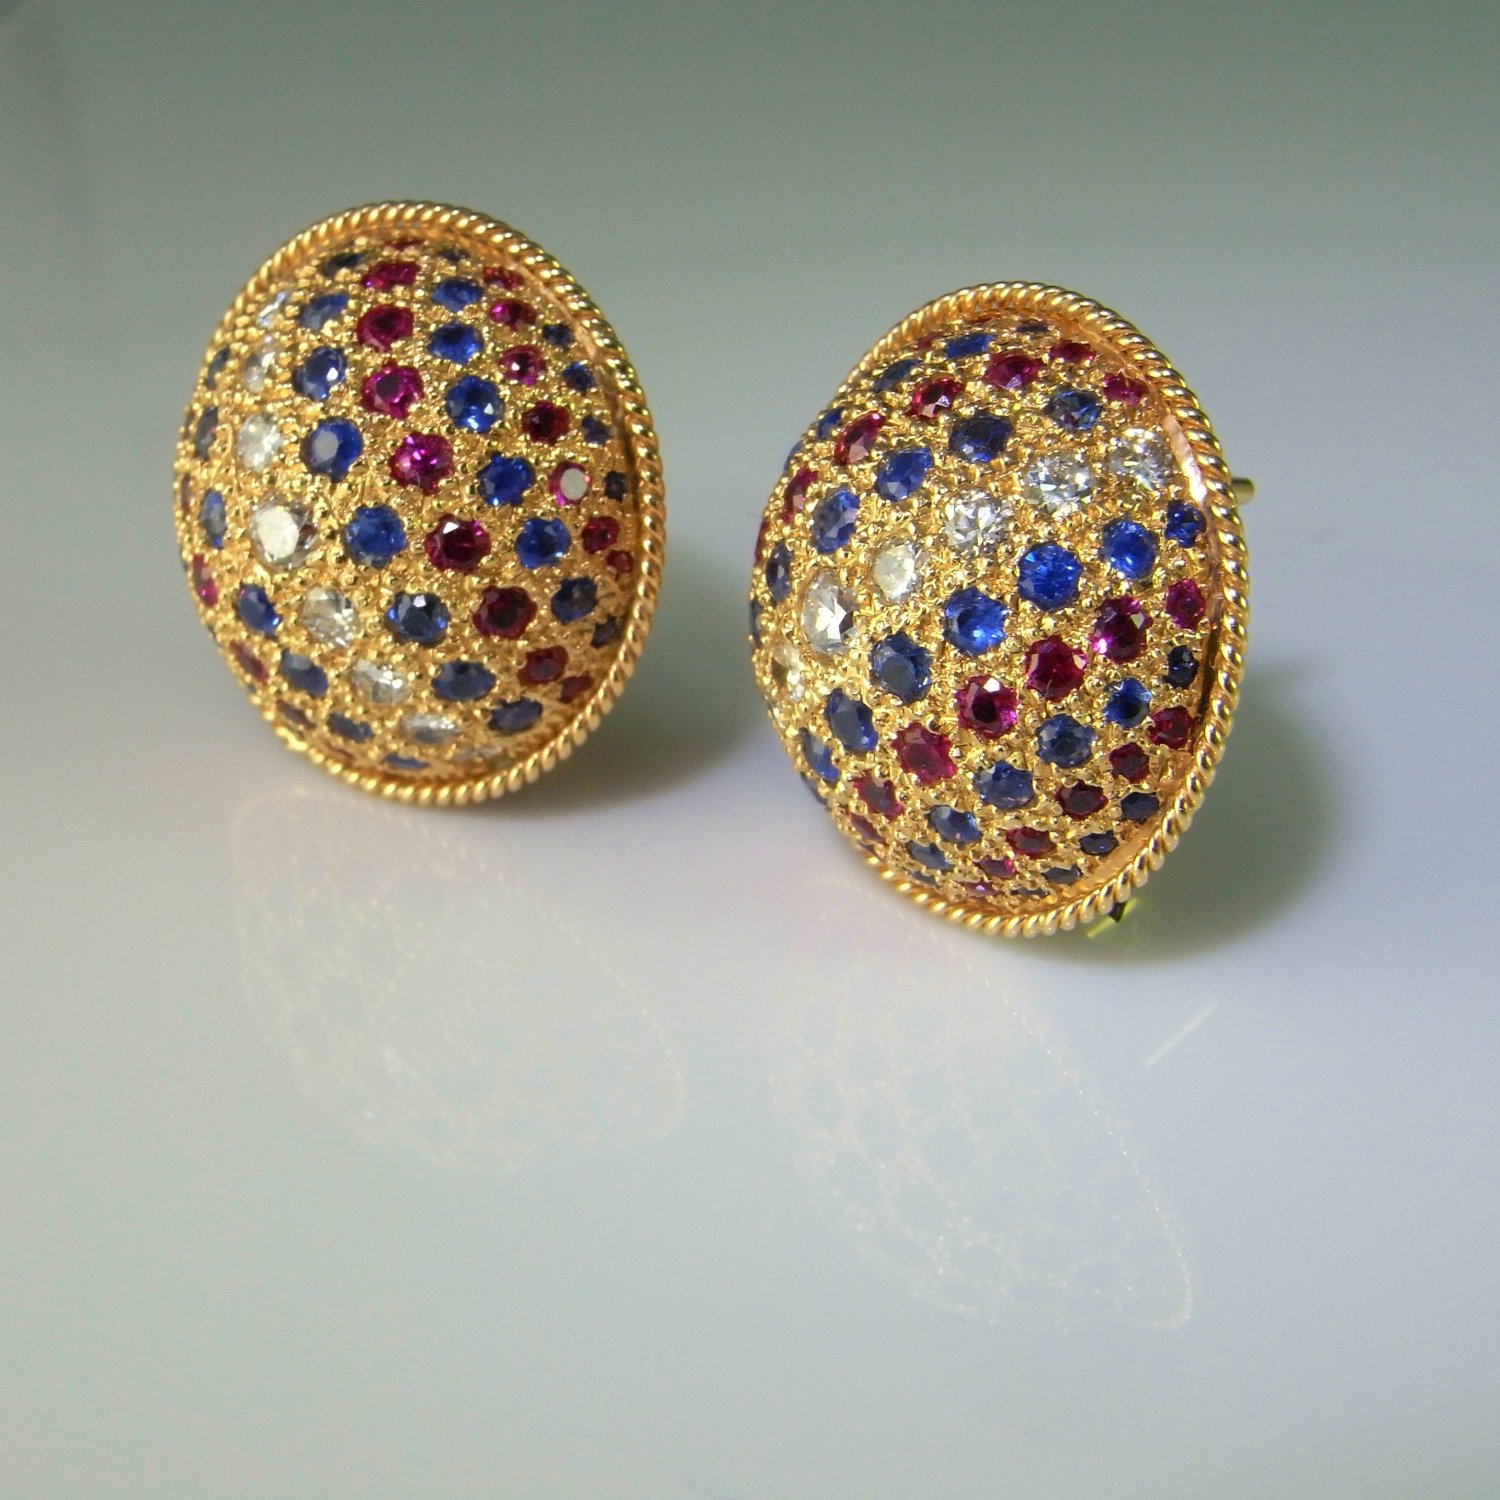 Dome Bombe Ruby Diamond Earrings Sapphire Diamond Earrings 14K Gold One of a Kind Modernist Mid Century 1950s Unique Red White Blue High End Luxury Sparkly Cornflower Blue Natural Rubies Natural Sapphires